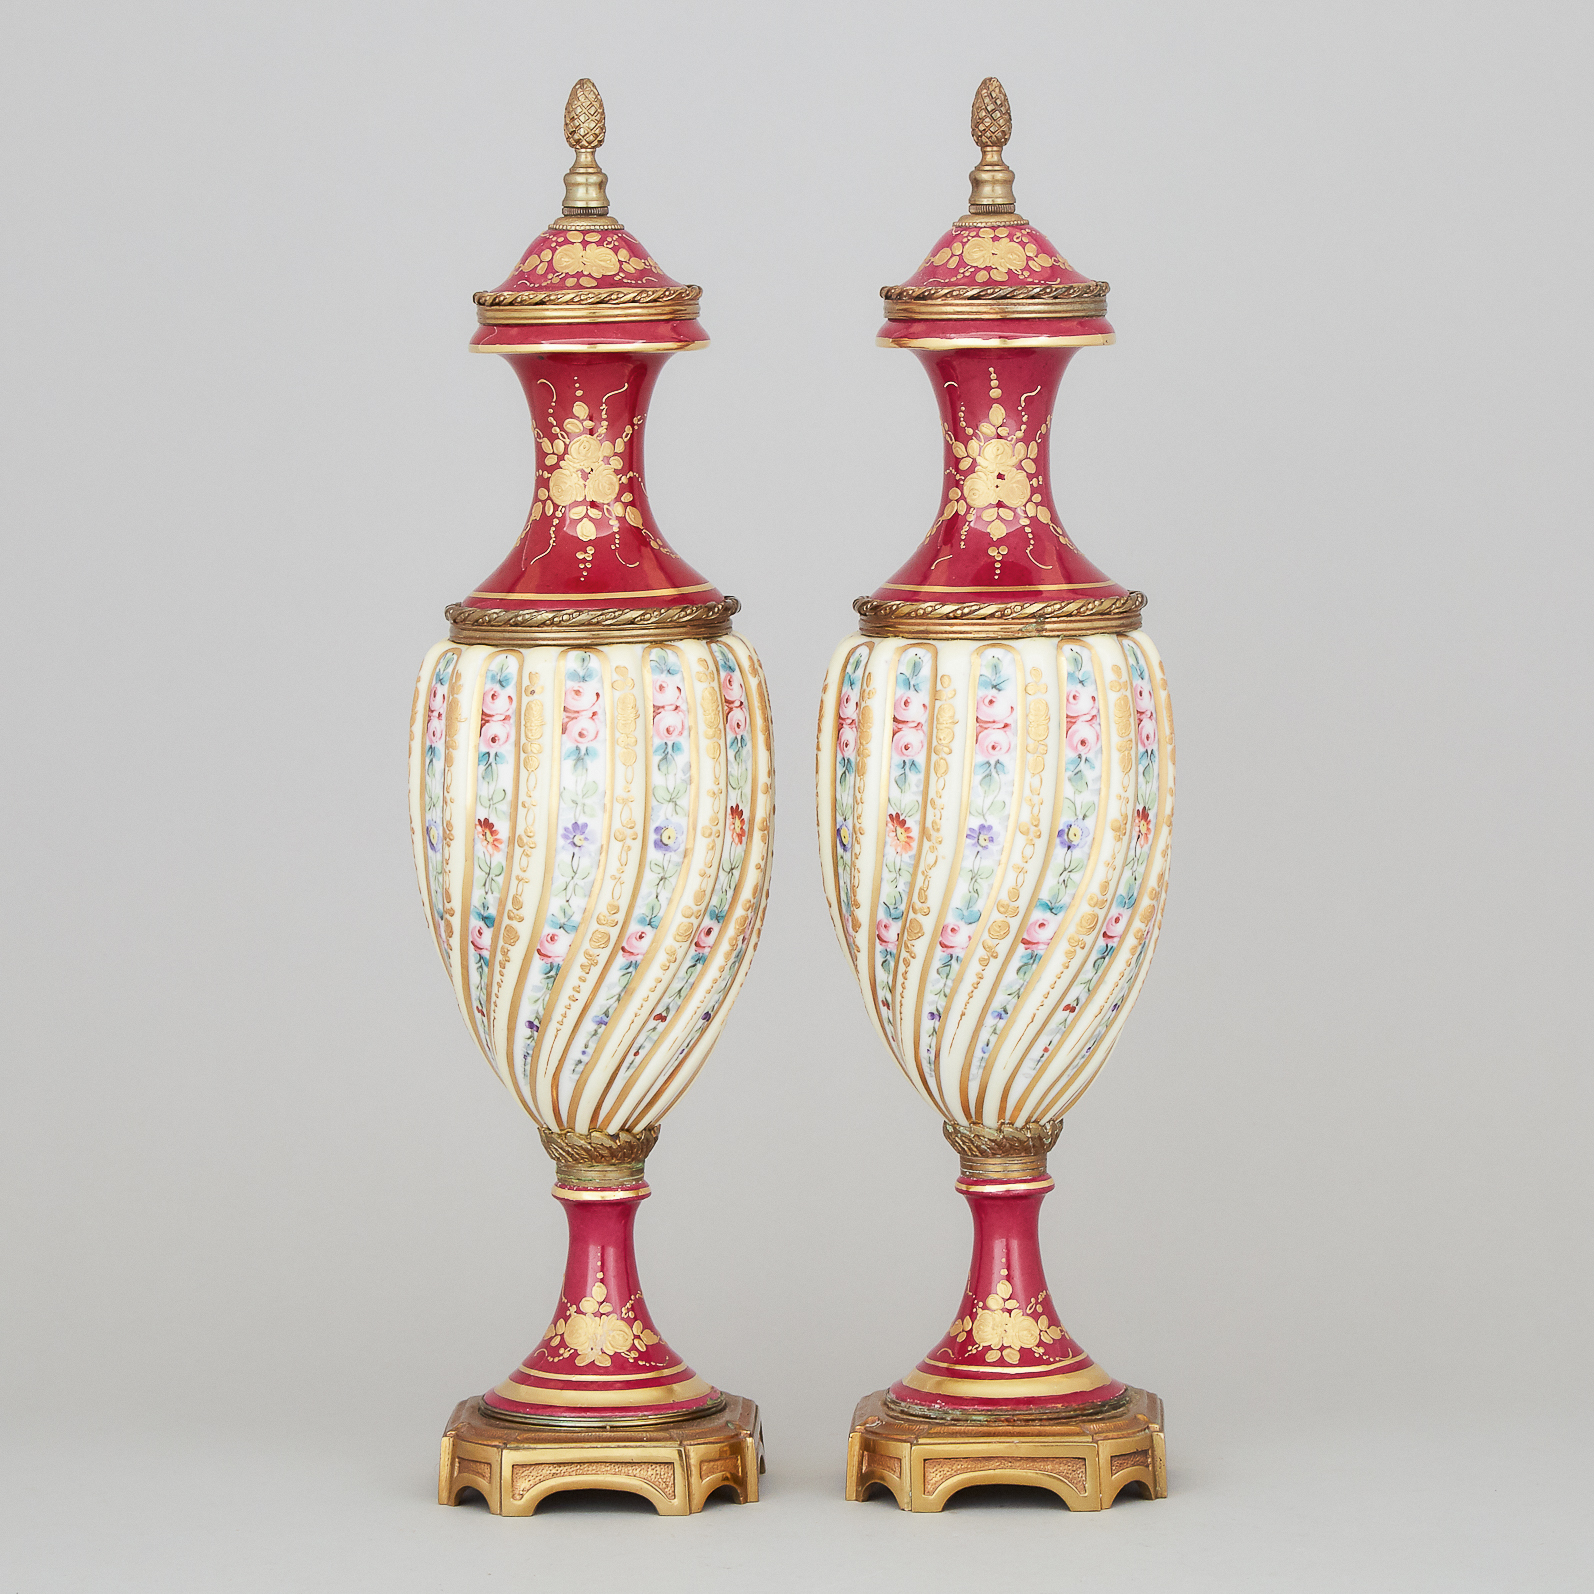 Pair of 'Sèvres' Claret-Ground Gilt Metal Mounted Urns, late 19th century